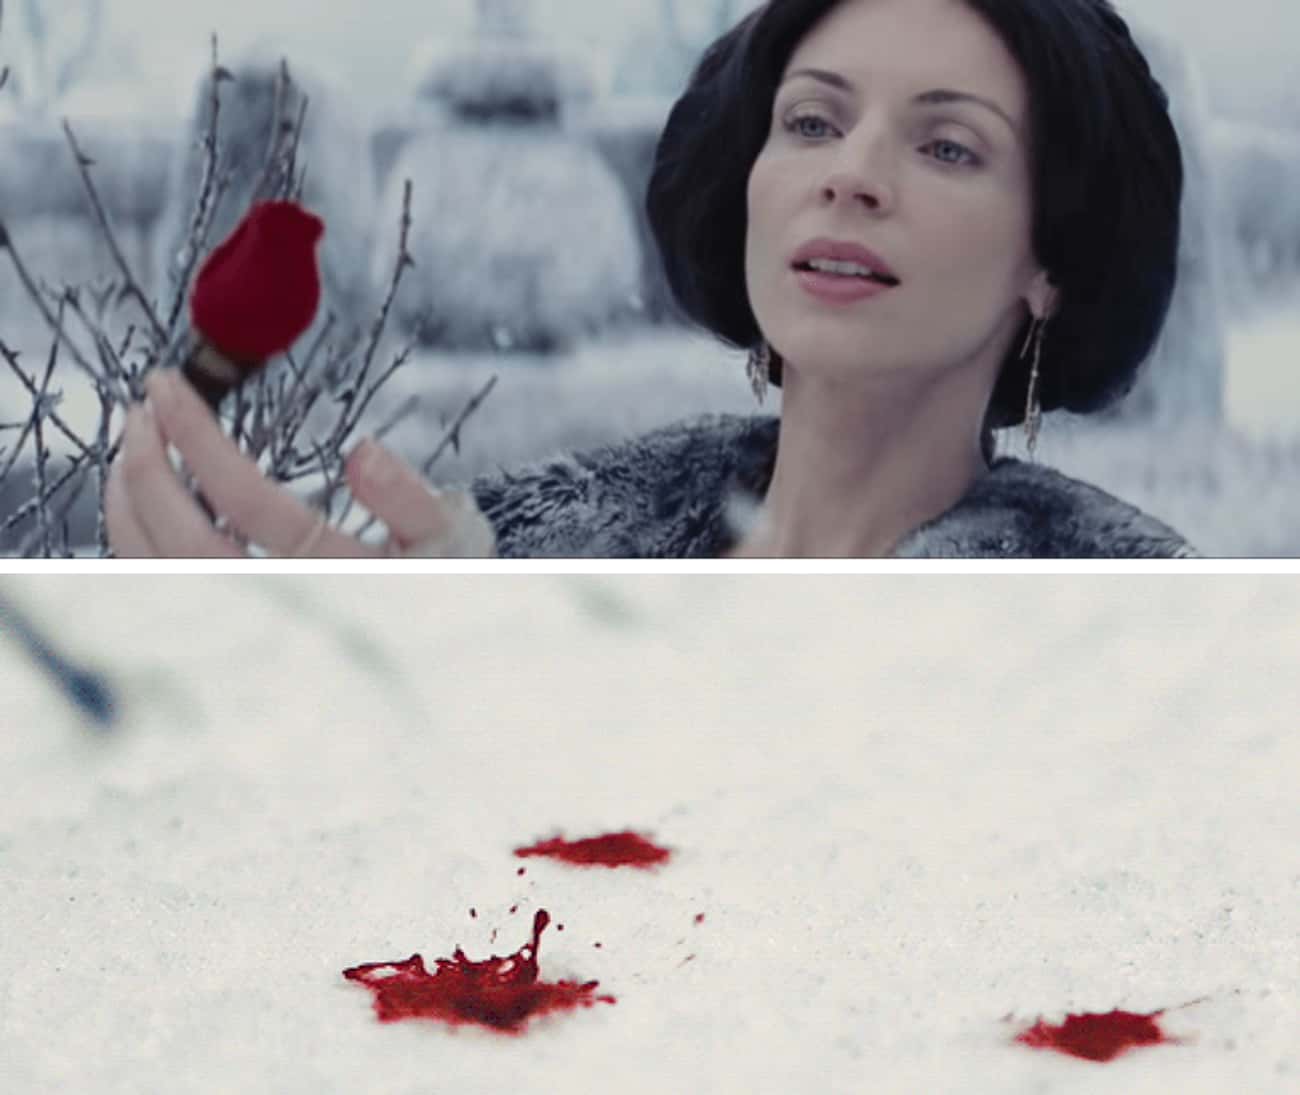 The Queen's Blood Drops In 'Snow White And The Huntsman' Were Real Blood